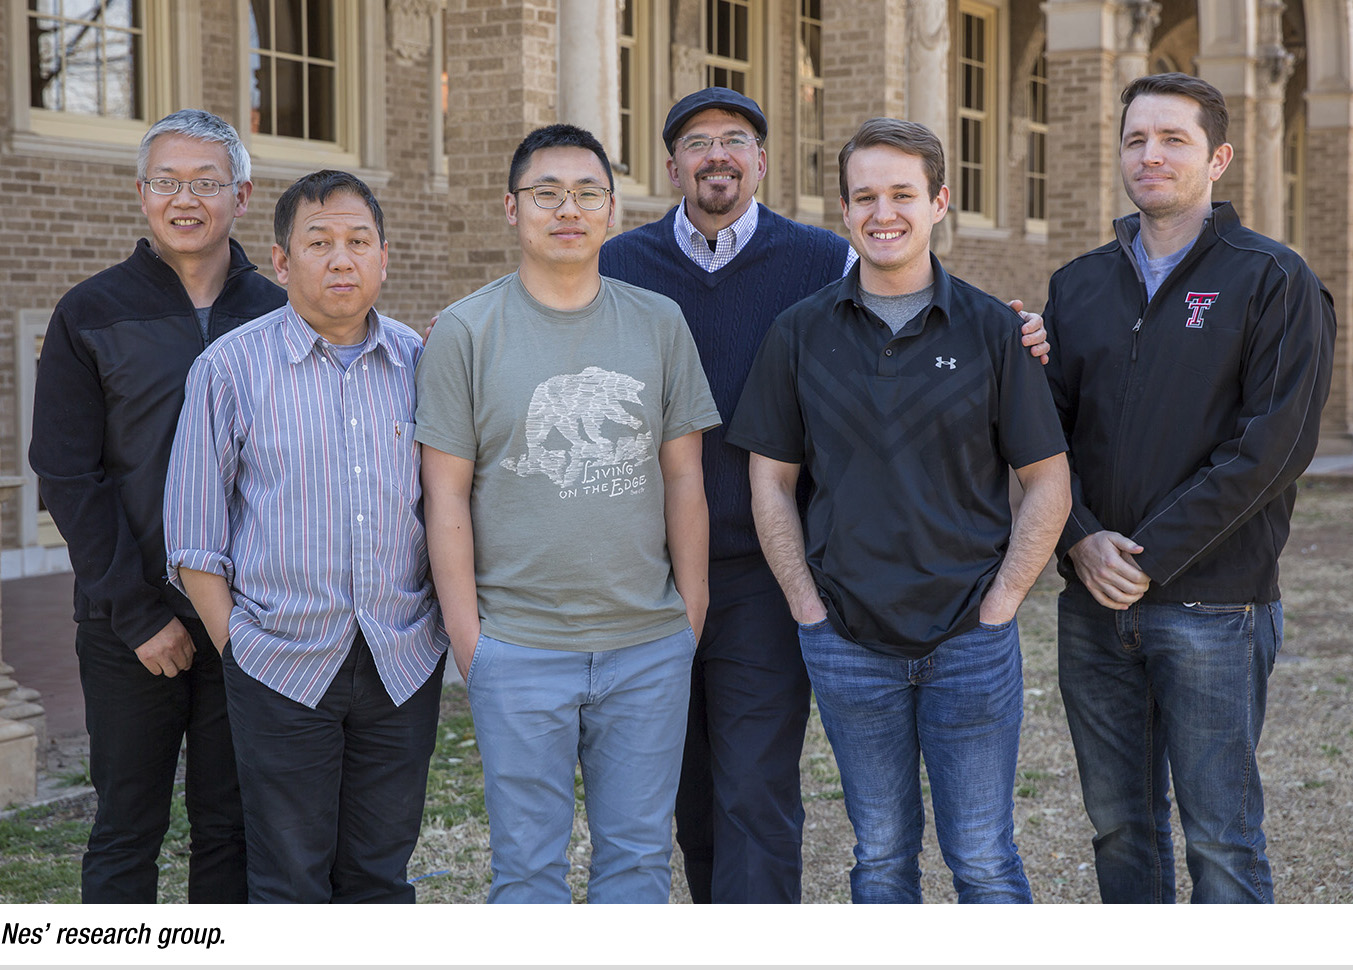 TTU Horn Professor W. David Nes with his 2019 research group